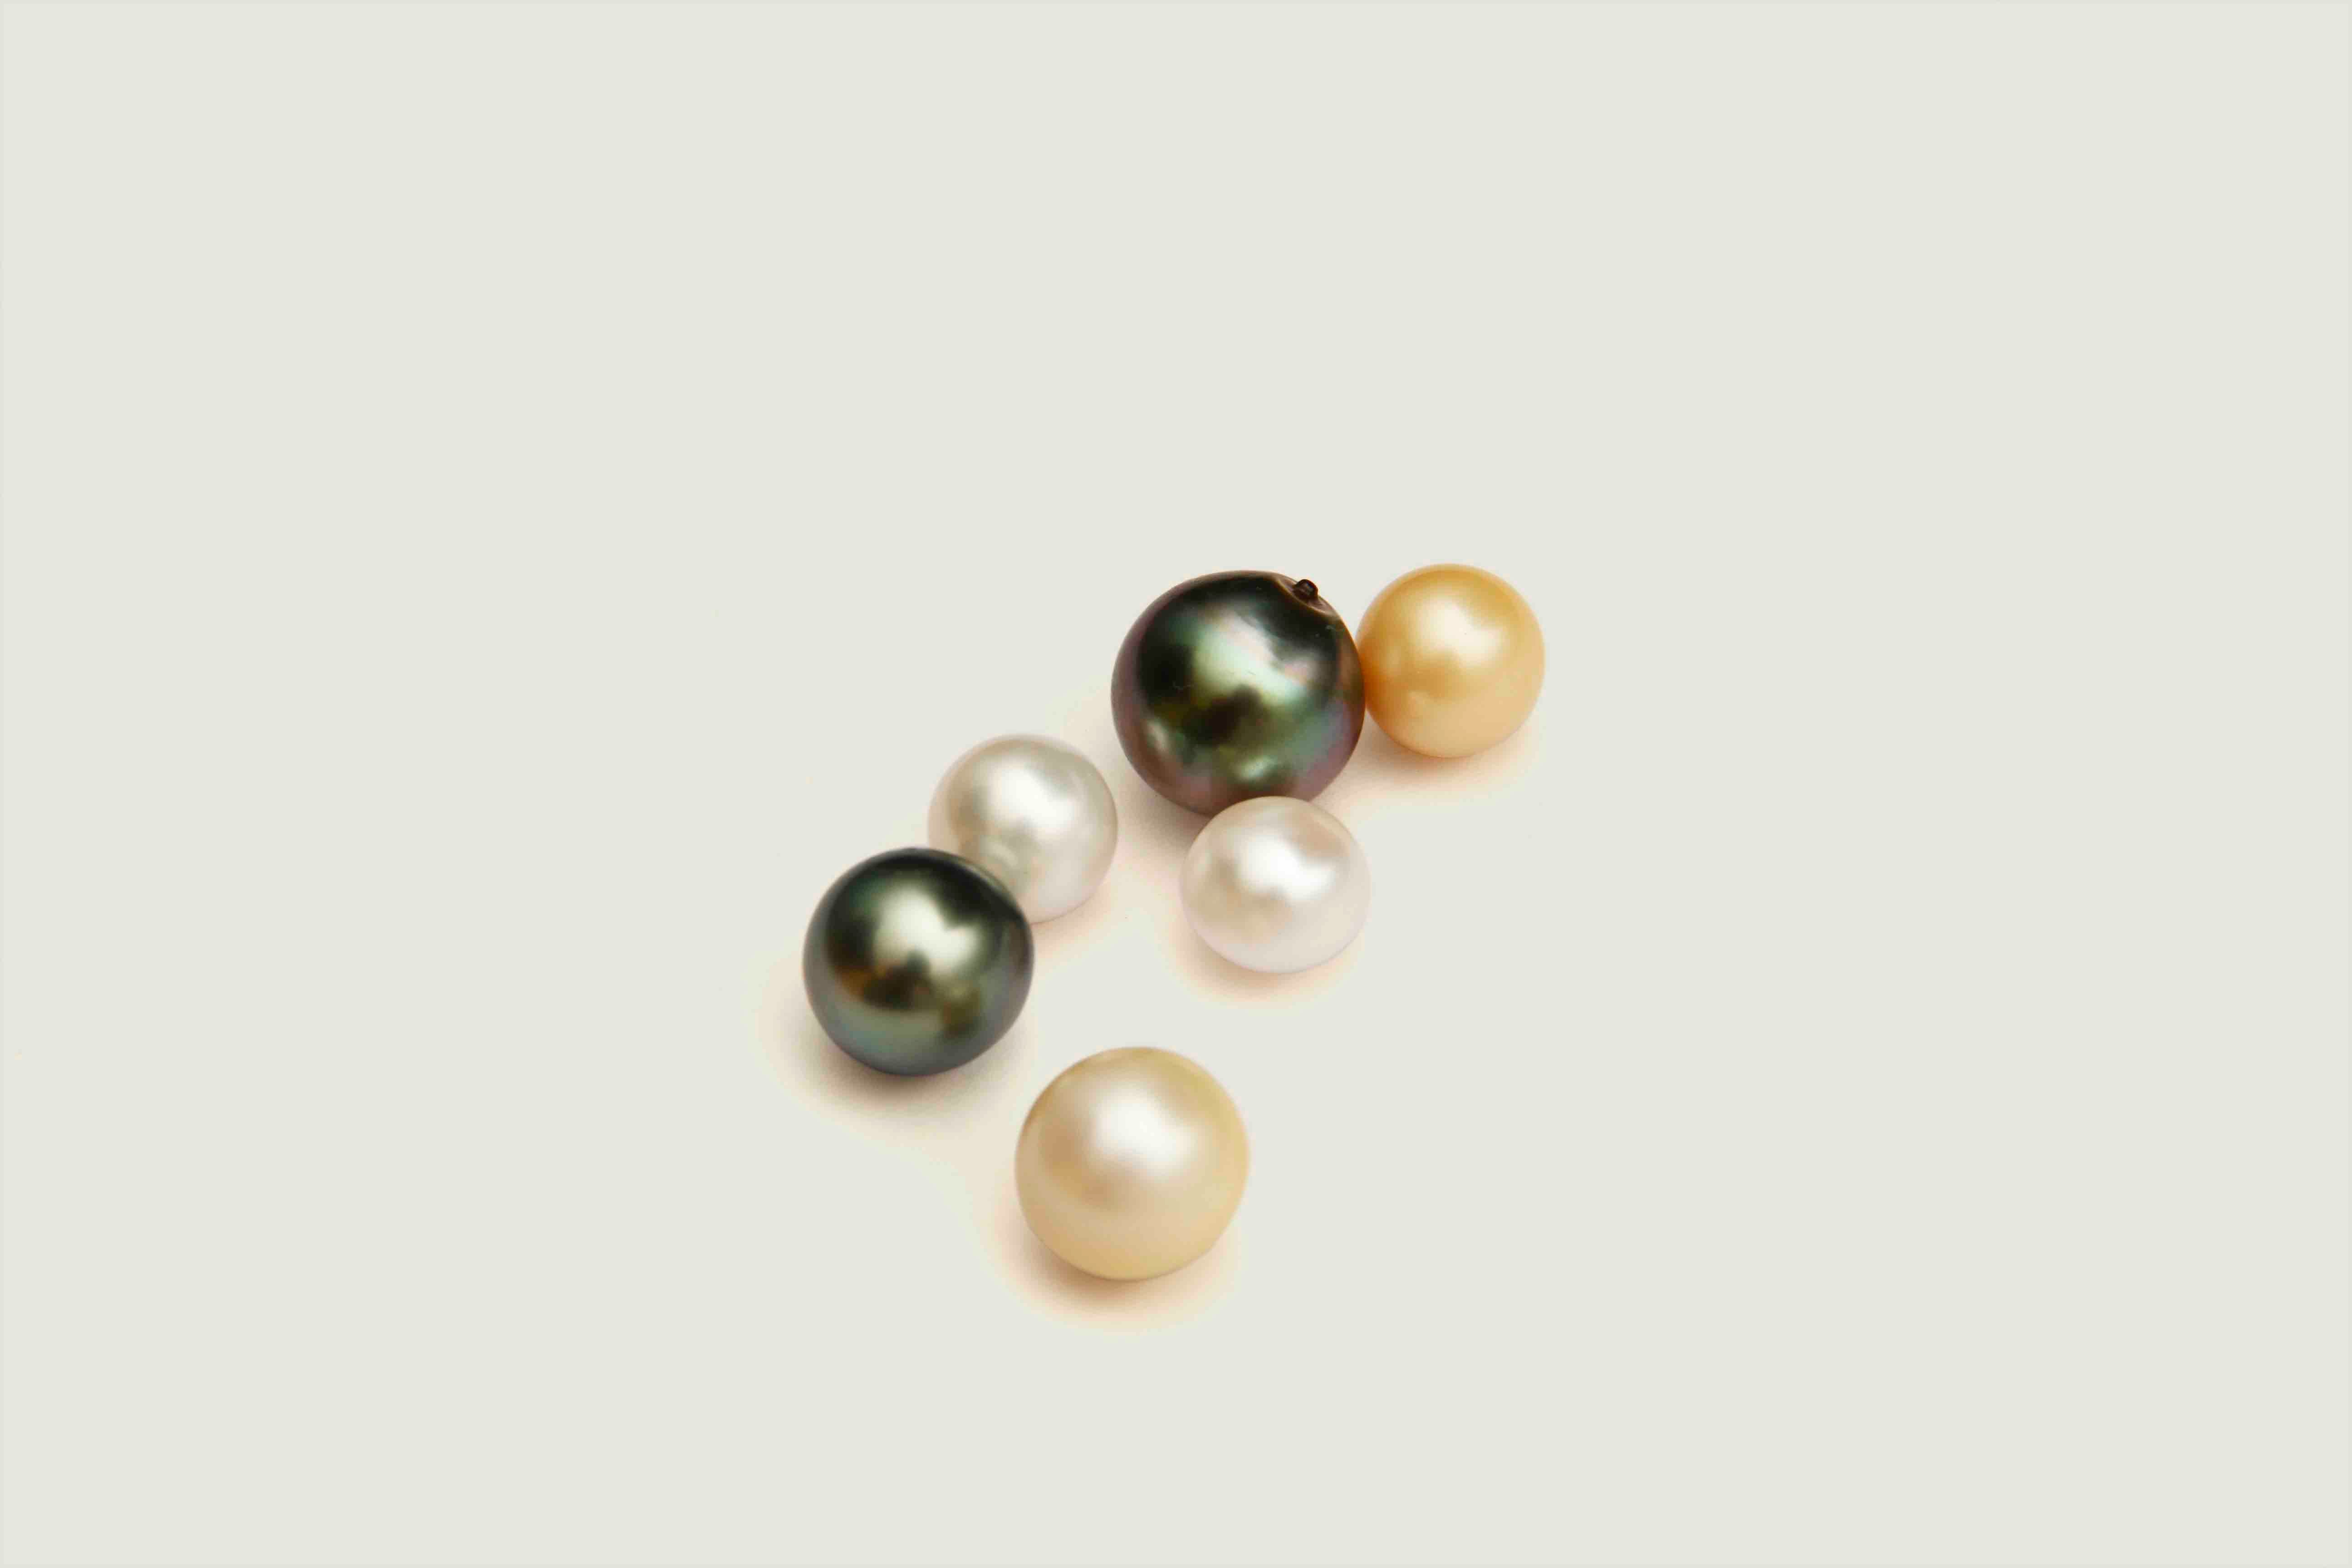 An Overview of Pearls